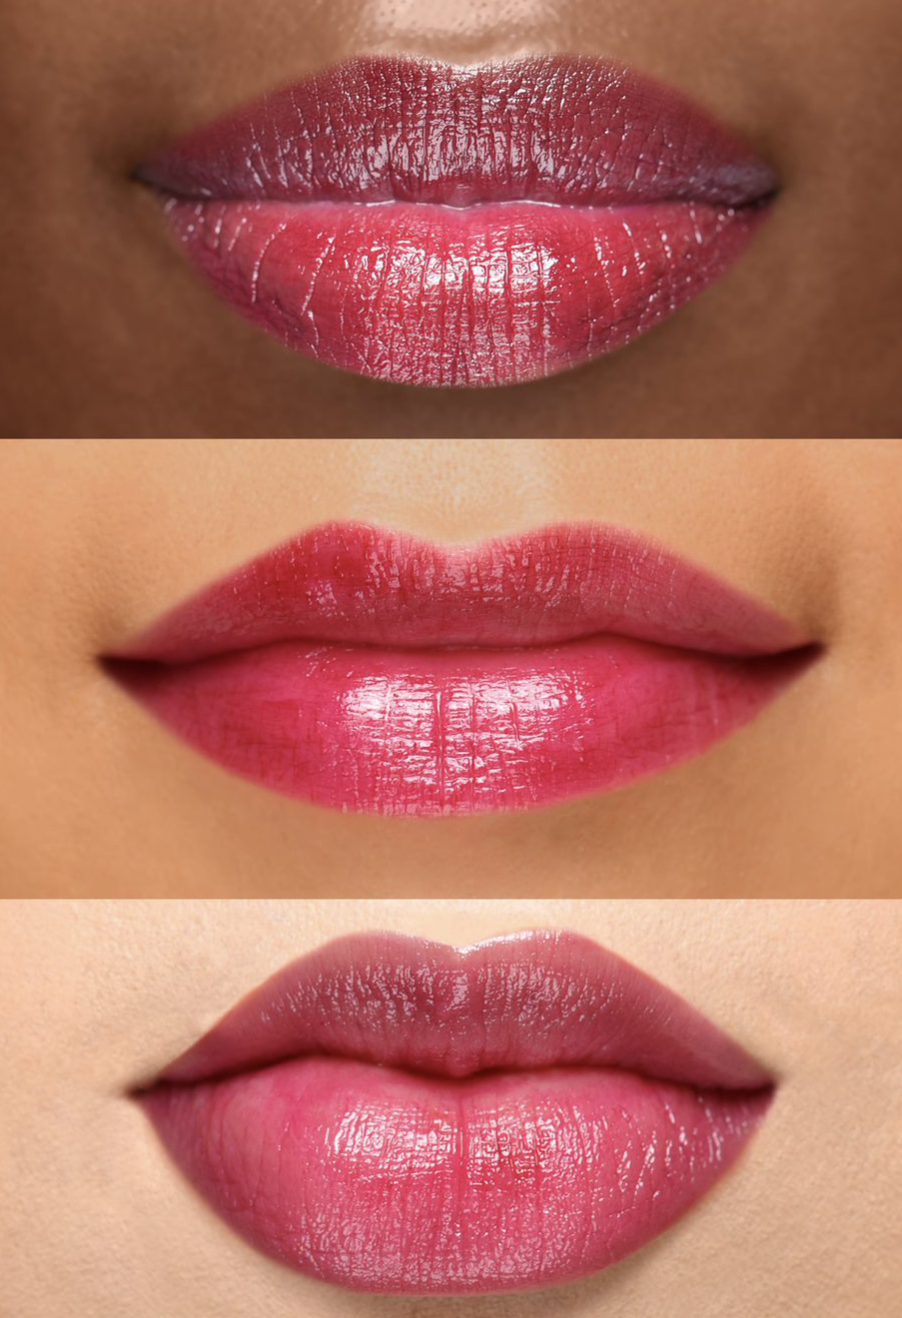 Uoma by Sharon C, It's Complicated Lip Tint + Oil + Gloss Boasty! - image 4 of 8